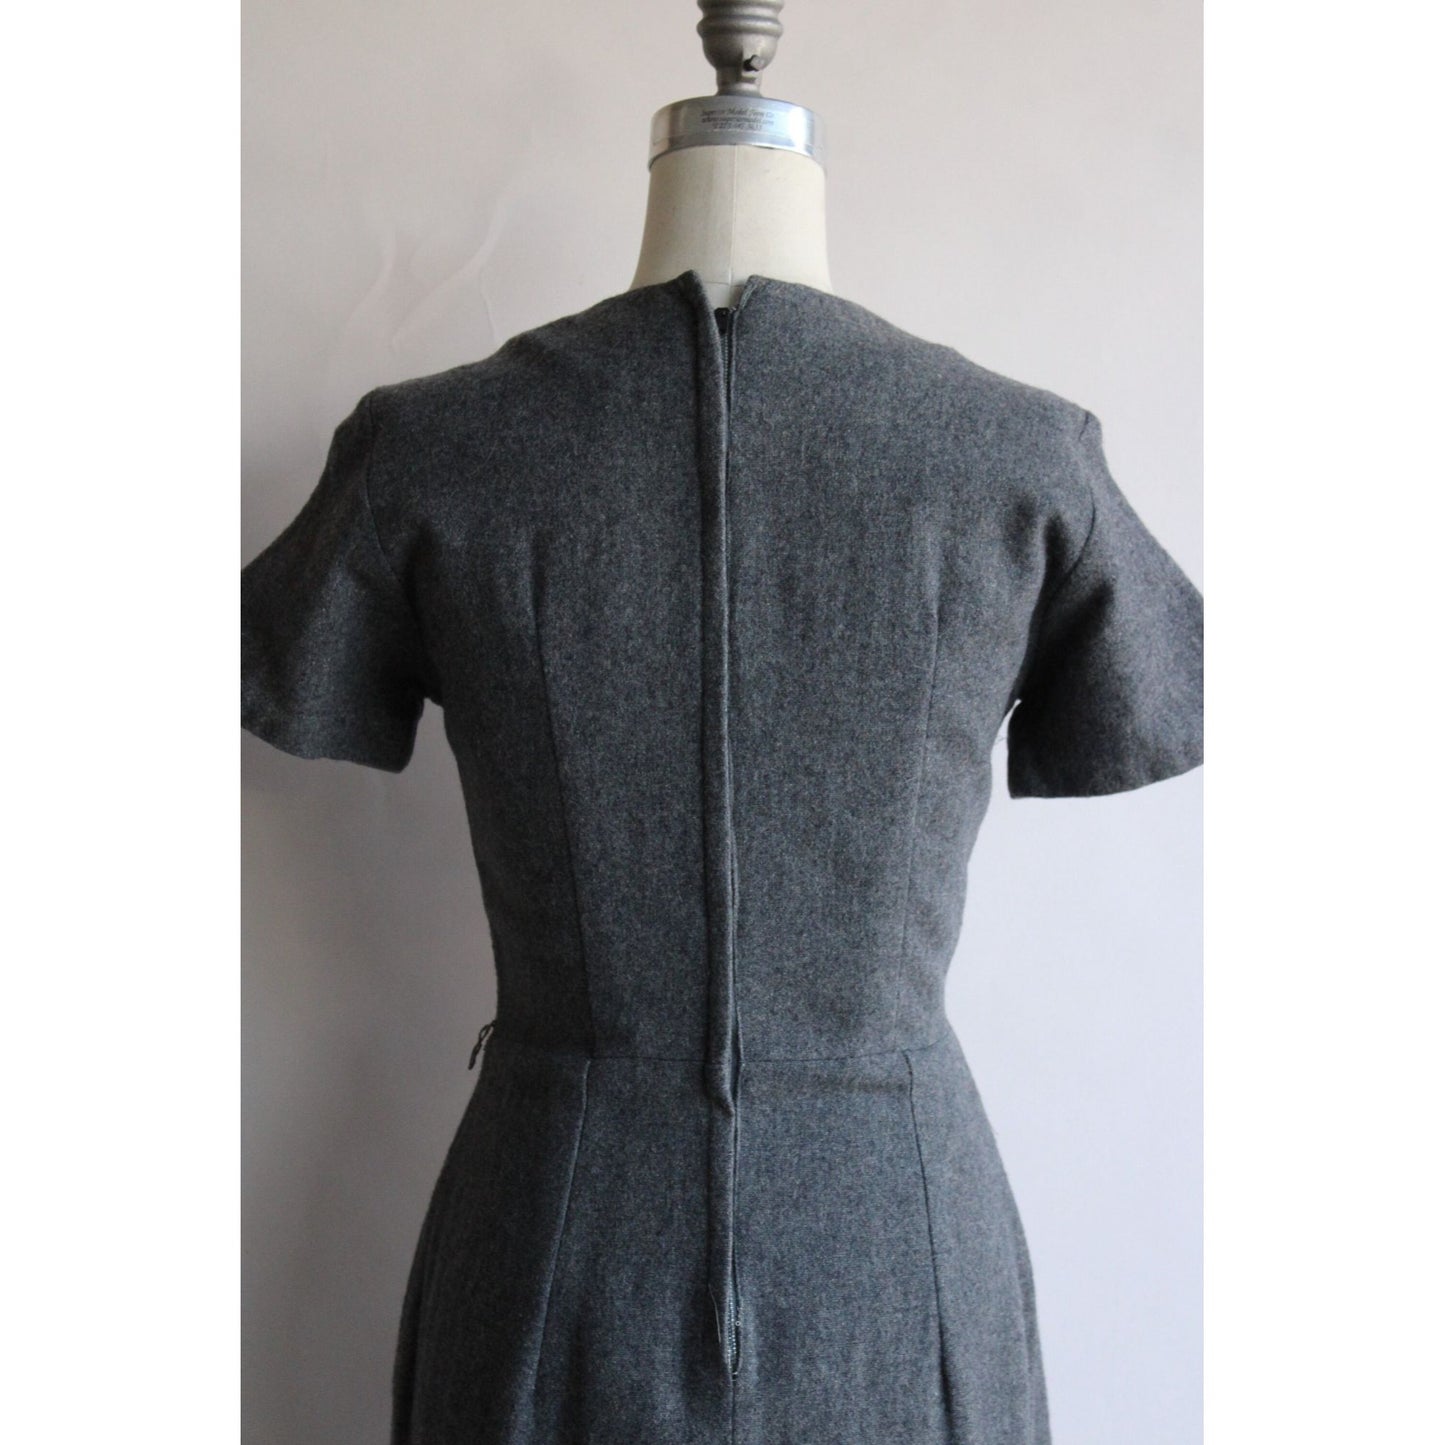 Vintage 1960s Gray Wool Fit and Flare Dress